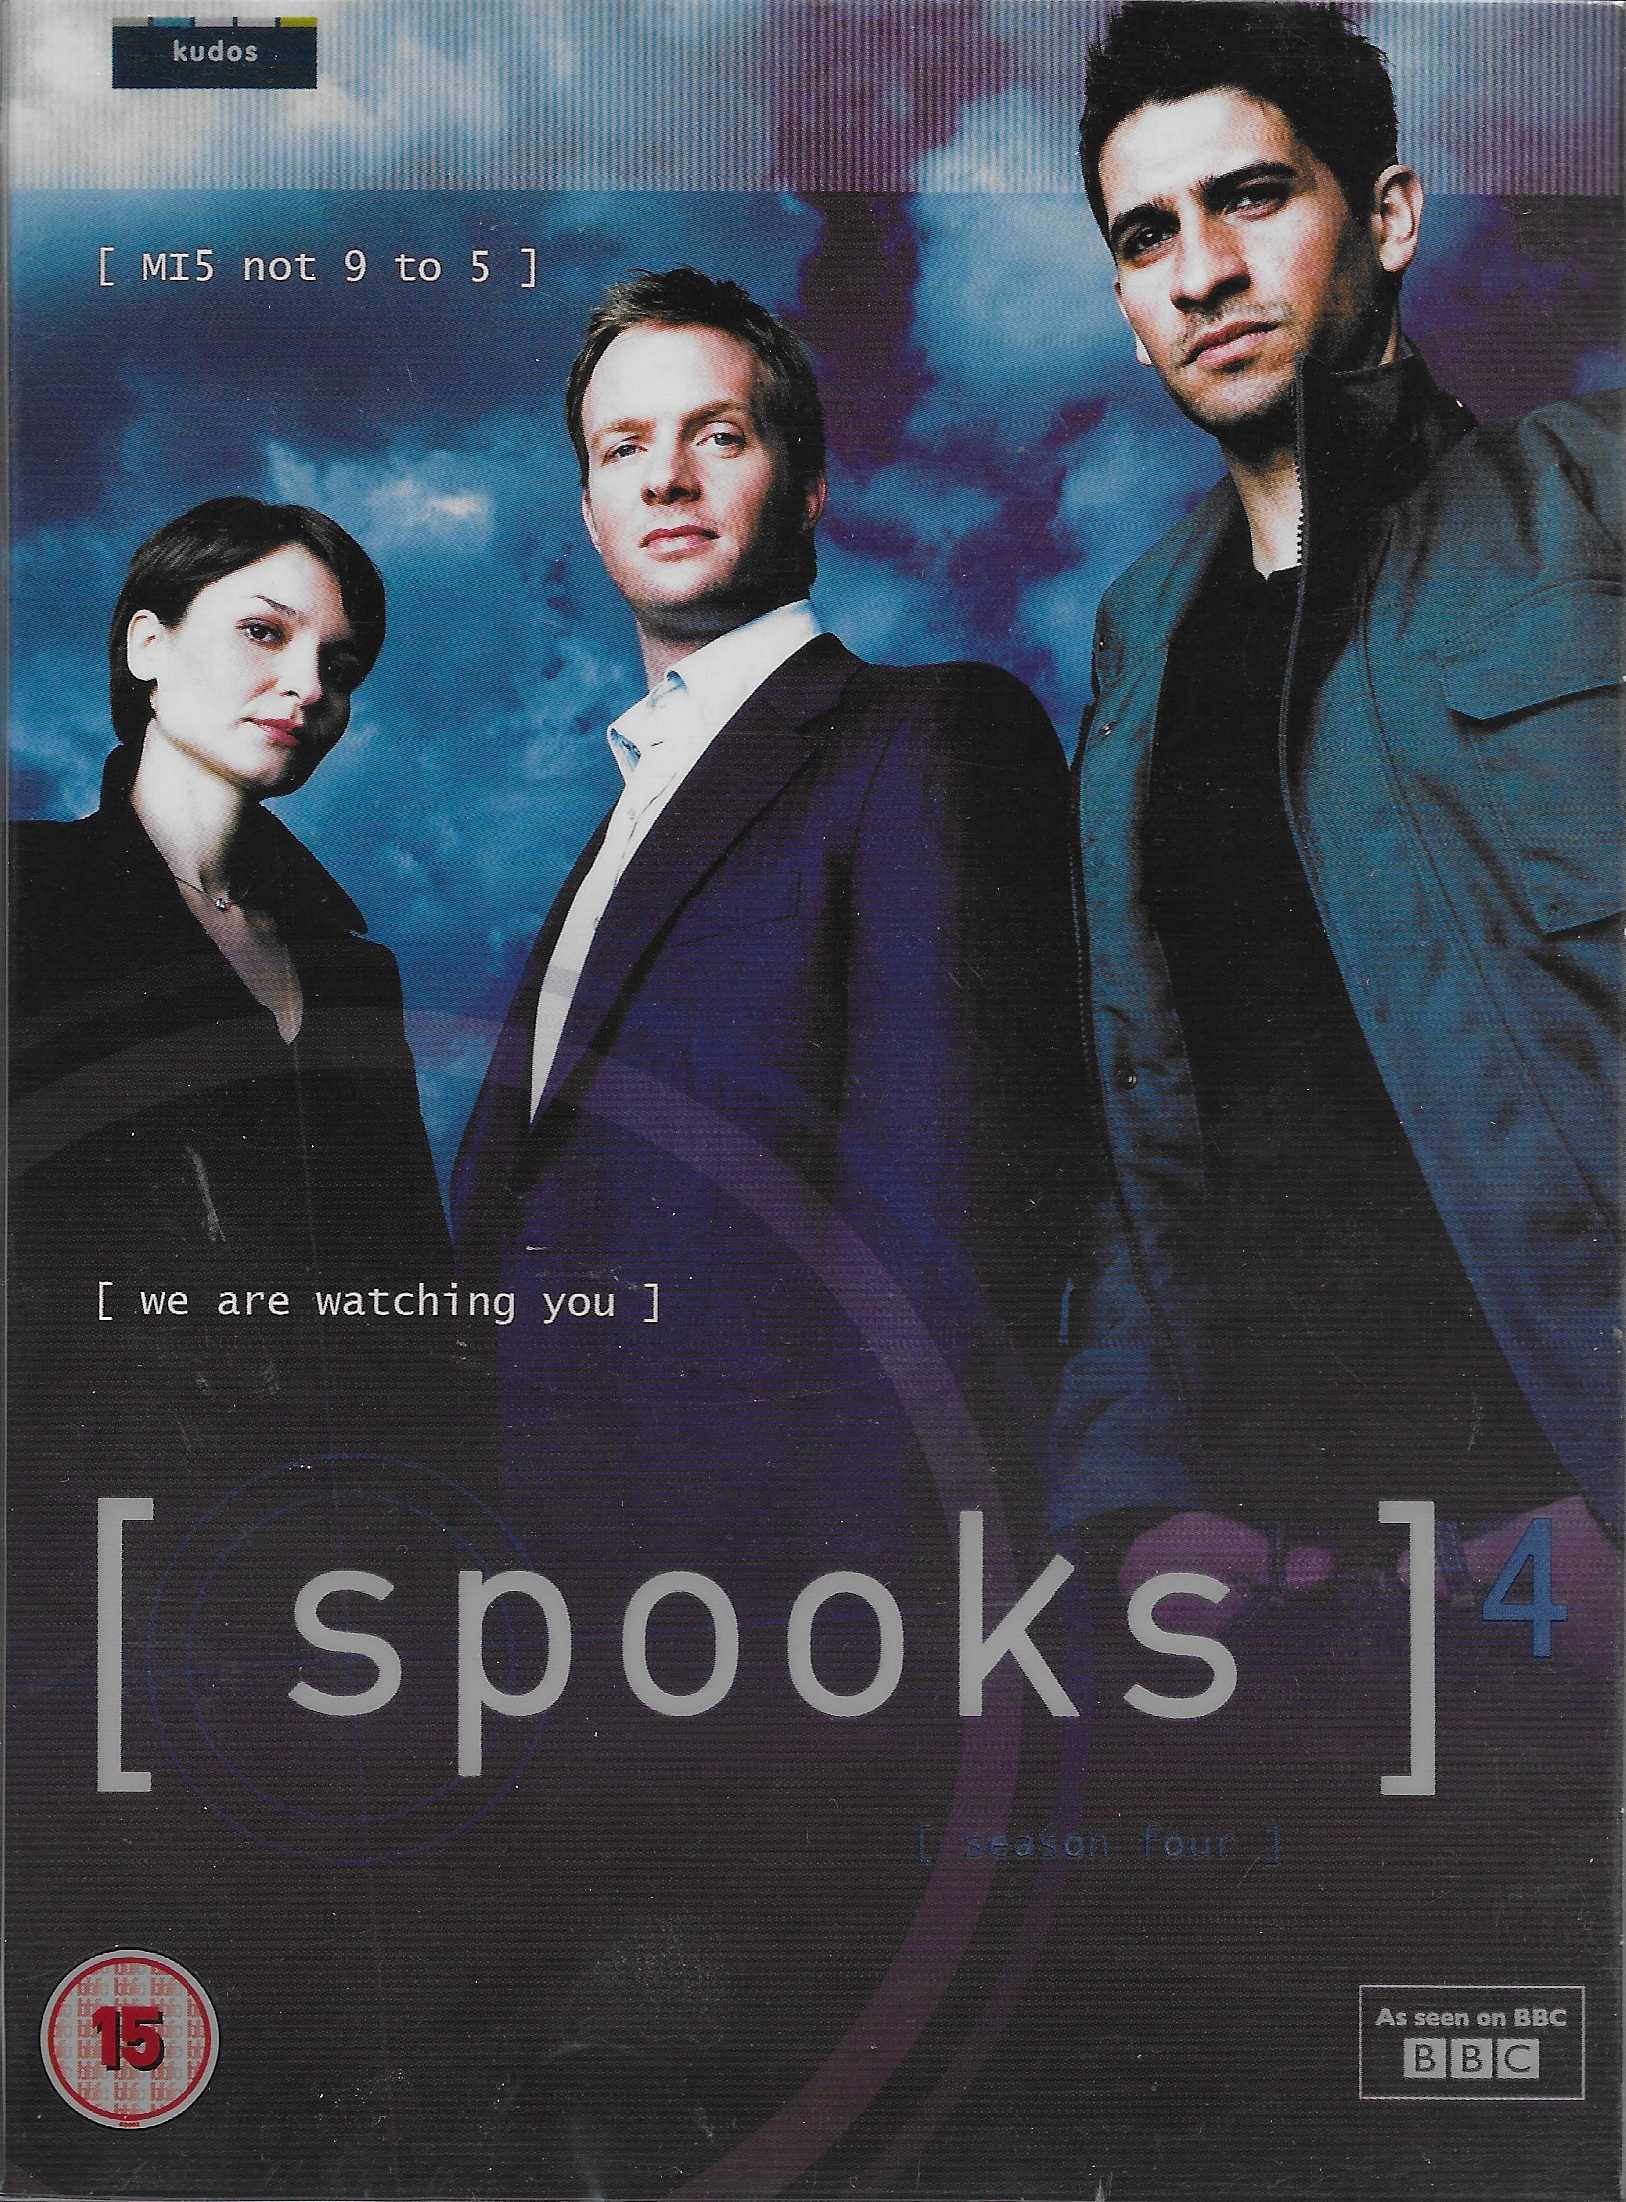 Picture of [ spooks ]4 by artist Ben Richards / Howard Brenton / Raymond Khoury / David Farr / Rupert Walters from the BBC dvds - Records and Tapes library